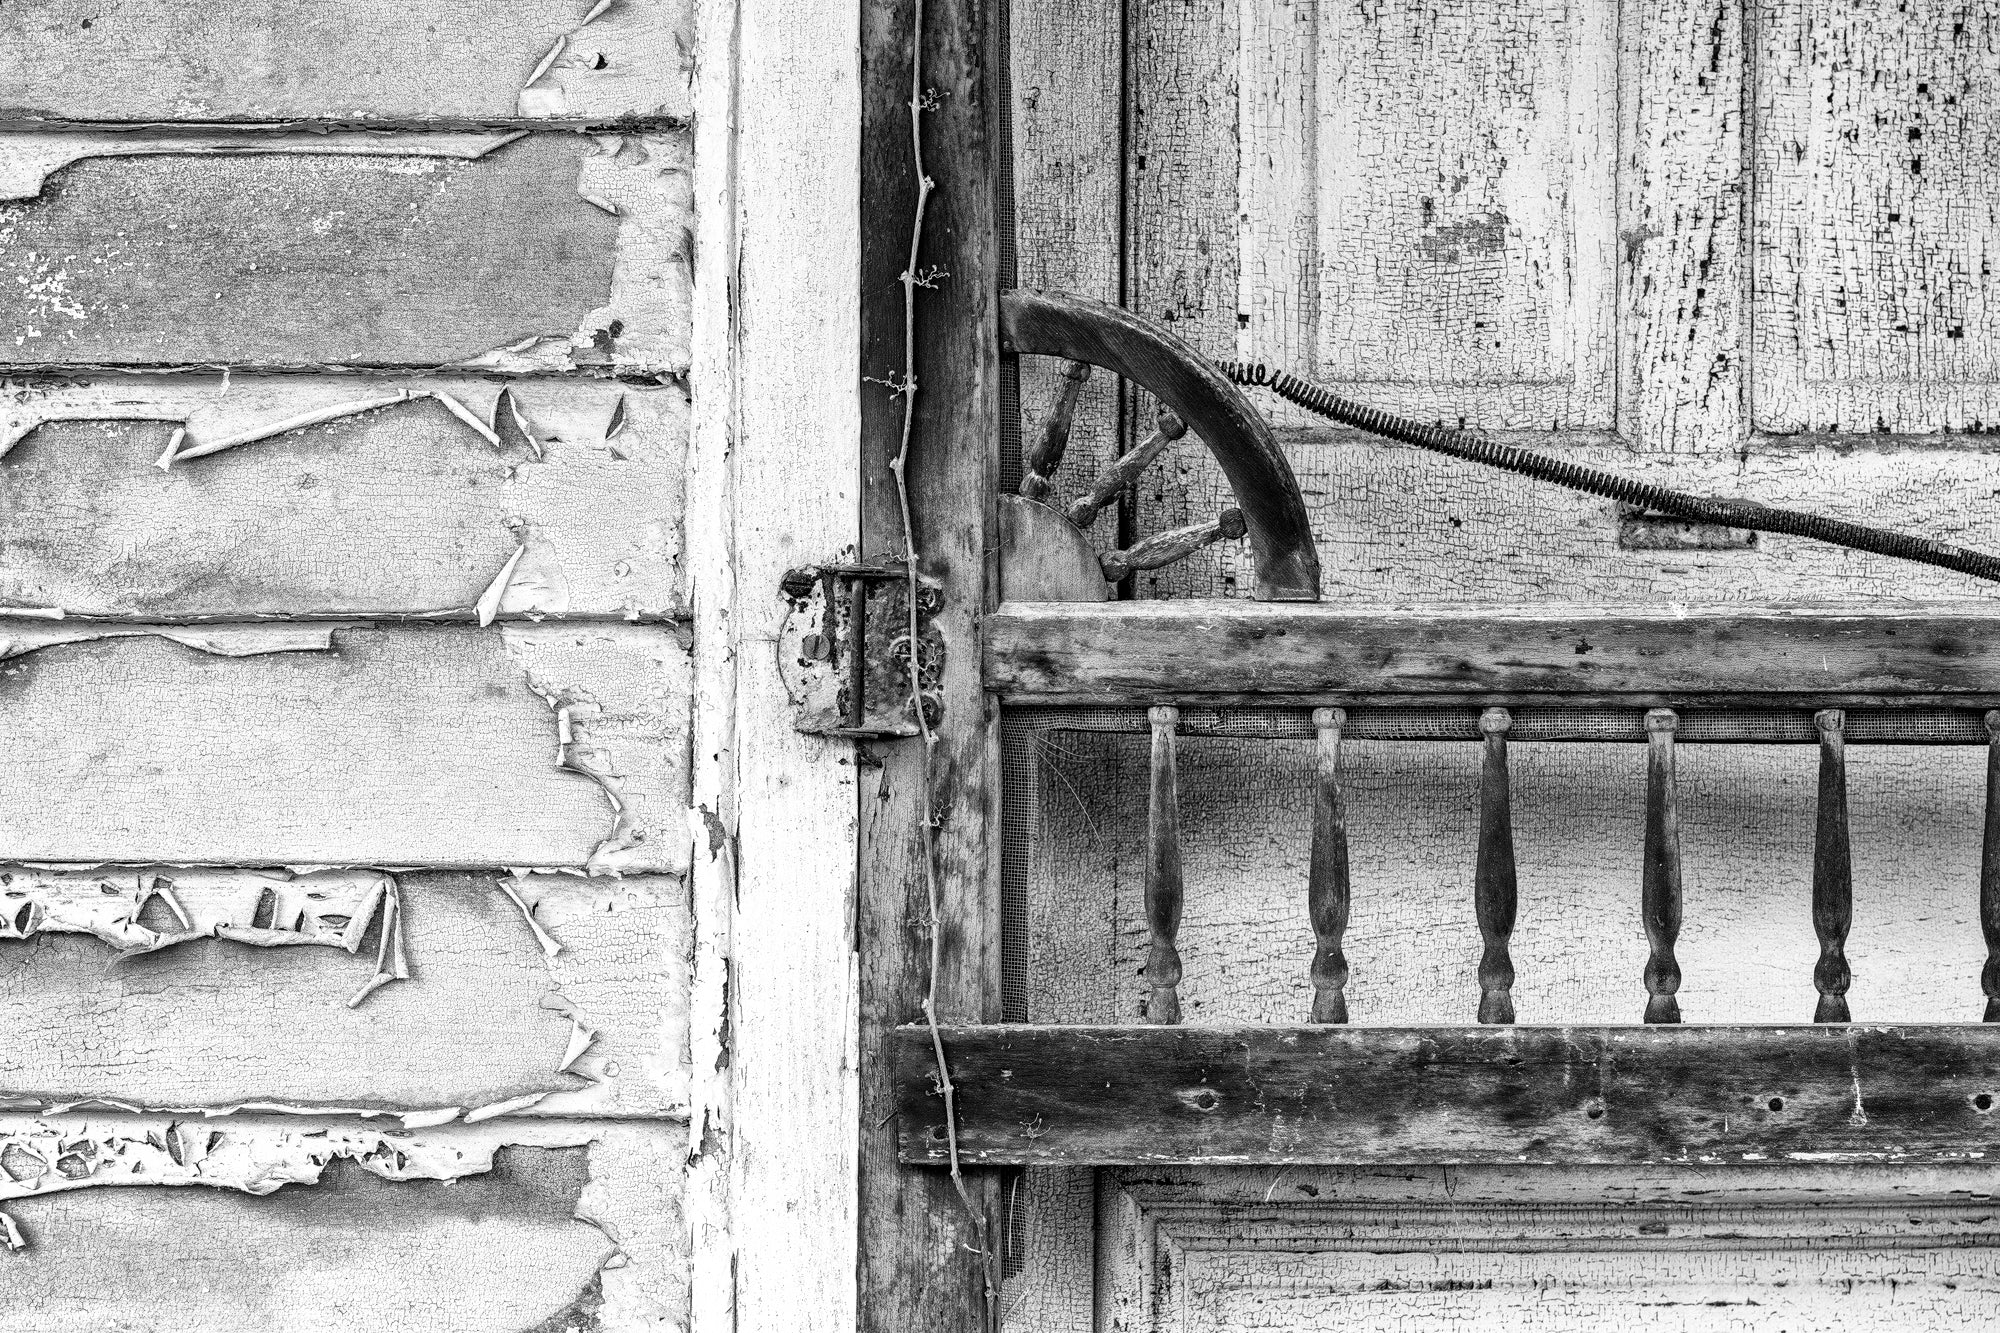 Woodwork Details on an Abandoned Country Store: Black and White Photograph by Keith Dotson. Buy a fine art print.